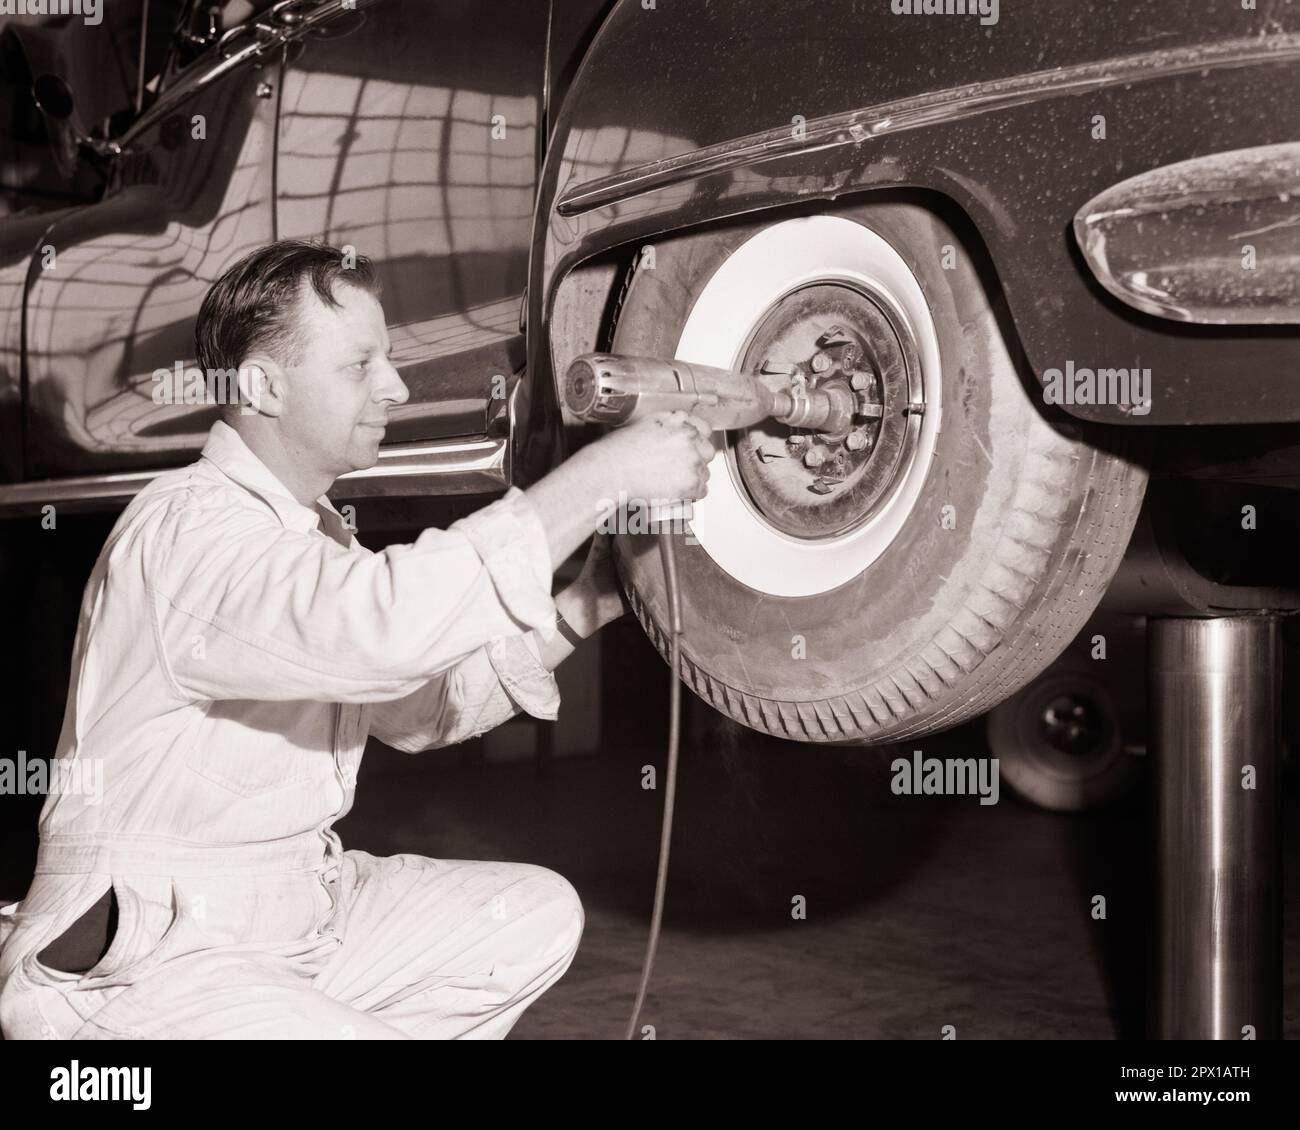 1950s GARAGE MECHANIC USING AN ELECTRIC WRENCH ON WHEEL TIRE HUB NUT - m3187 PRC001 HARS PROFESSION CONFIDENCE TRANSPORTATION B&W CARRIAGE SKILL OCCUPATION SKILLS CUSTOMER SERVICE AUTOS SERVICE STATION WHITEWALL CAREERS LOW ANGLE POWERFUL LABOR MECHANICS EMPLOYMENT NEAR OCCUPATIONS USING REPAIRING WRENCH AUTOMOBILES VEHICLES INFRASTRUCTURE EMPLOYEE HUB MID-ADULT MID-ADULT MAN NUT SERVICING BLACK AND WHITE CAUCASIAN ETHNICITY LABORING OLD FASHIONED Stock Photo